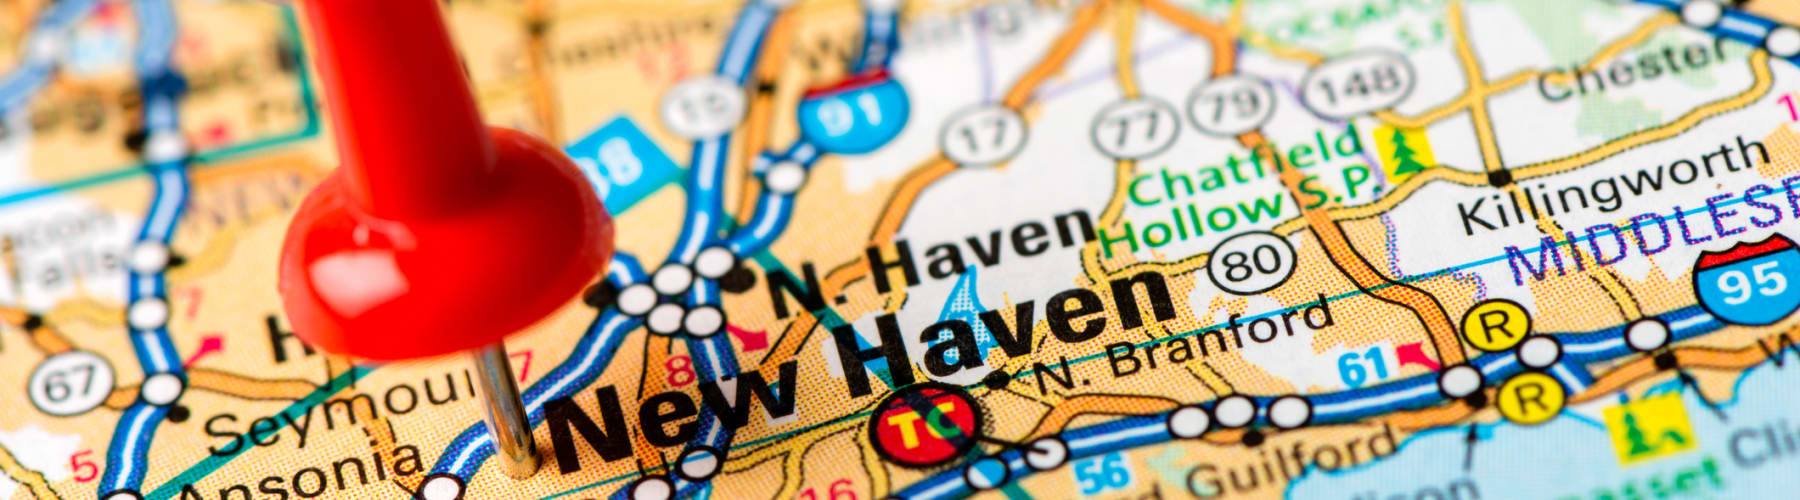 New Haven Connecticut map pin